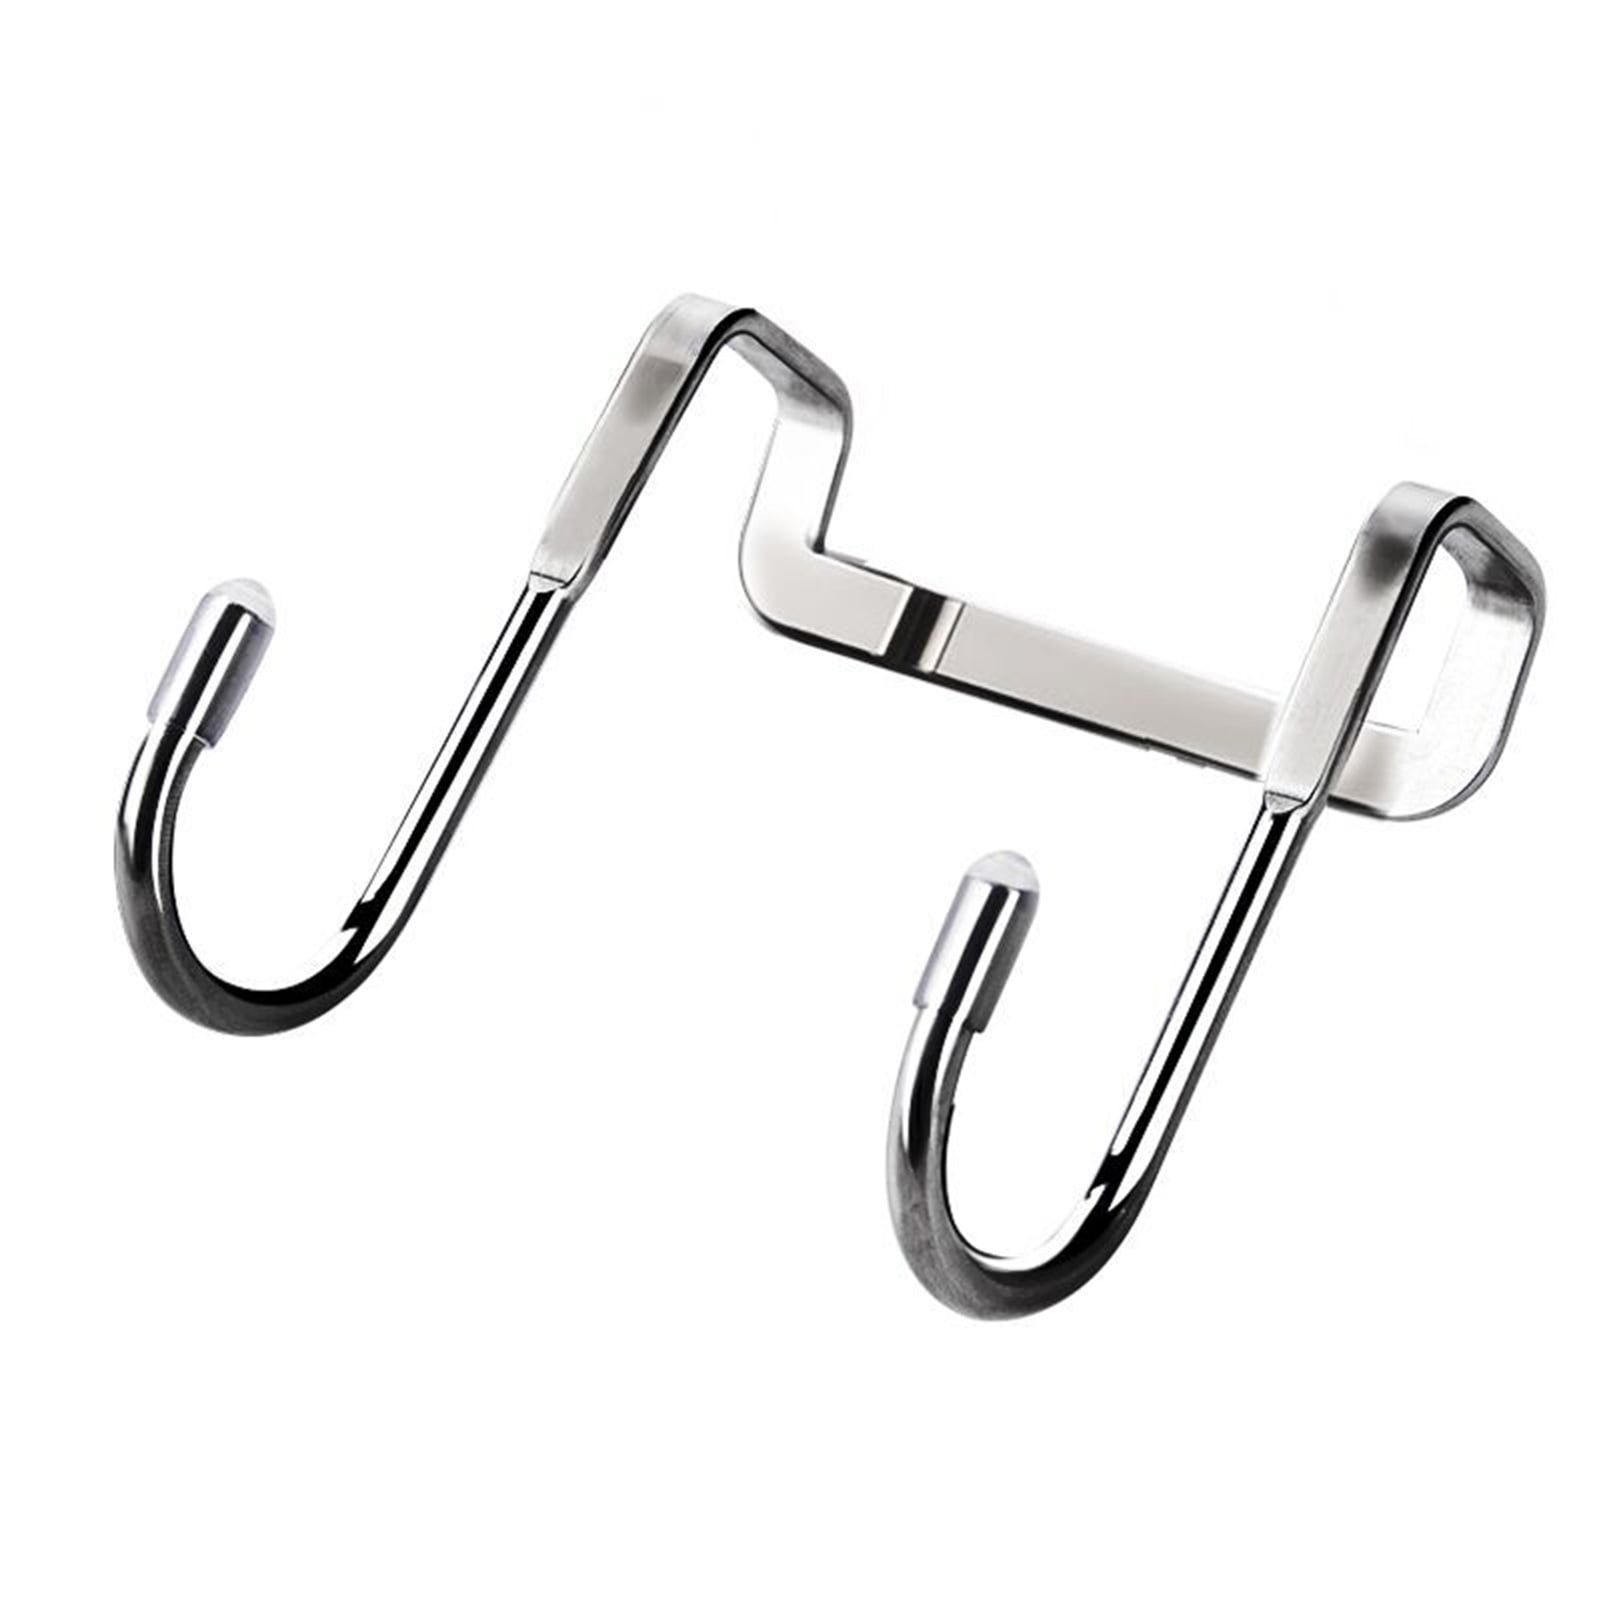 Over The Door Door Hanger Free Punching No Trace Stainless Steel Clothes Rack for Home Black